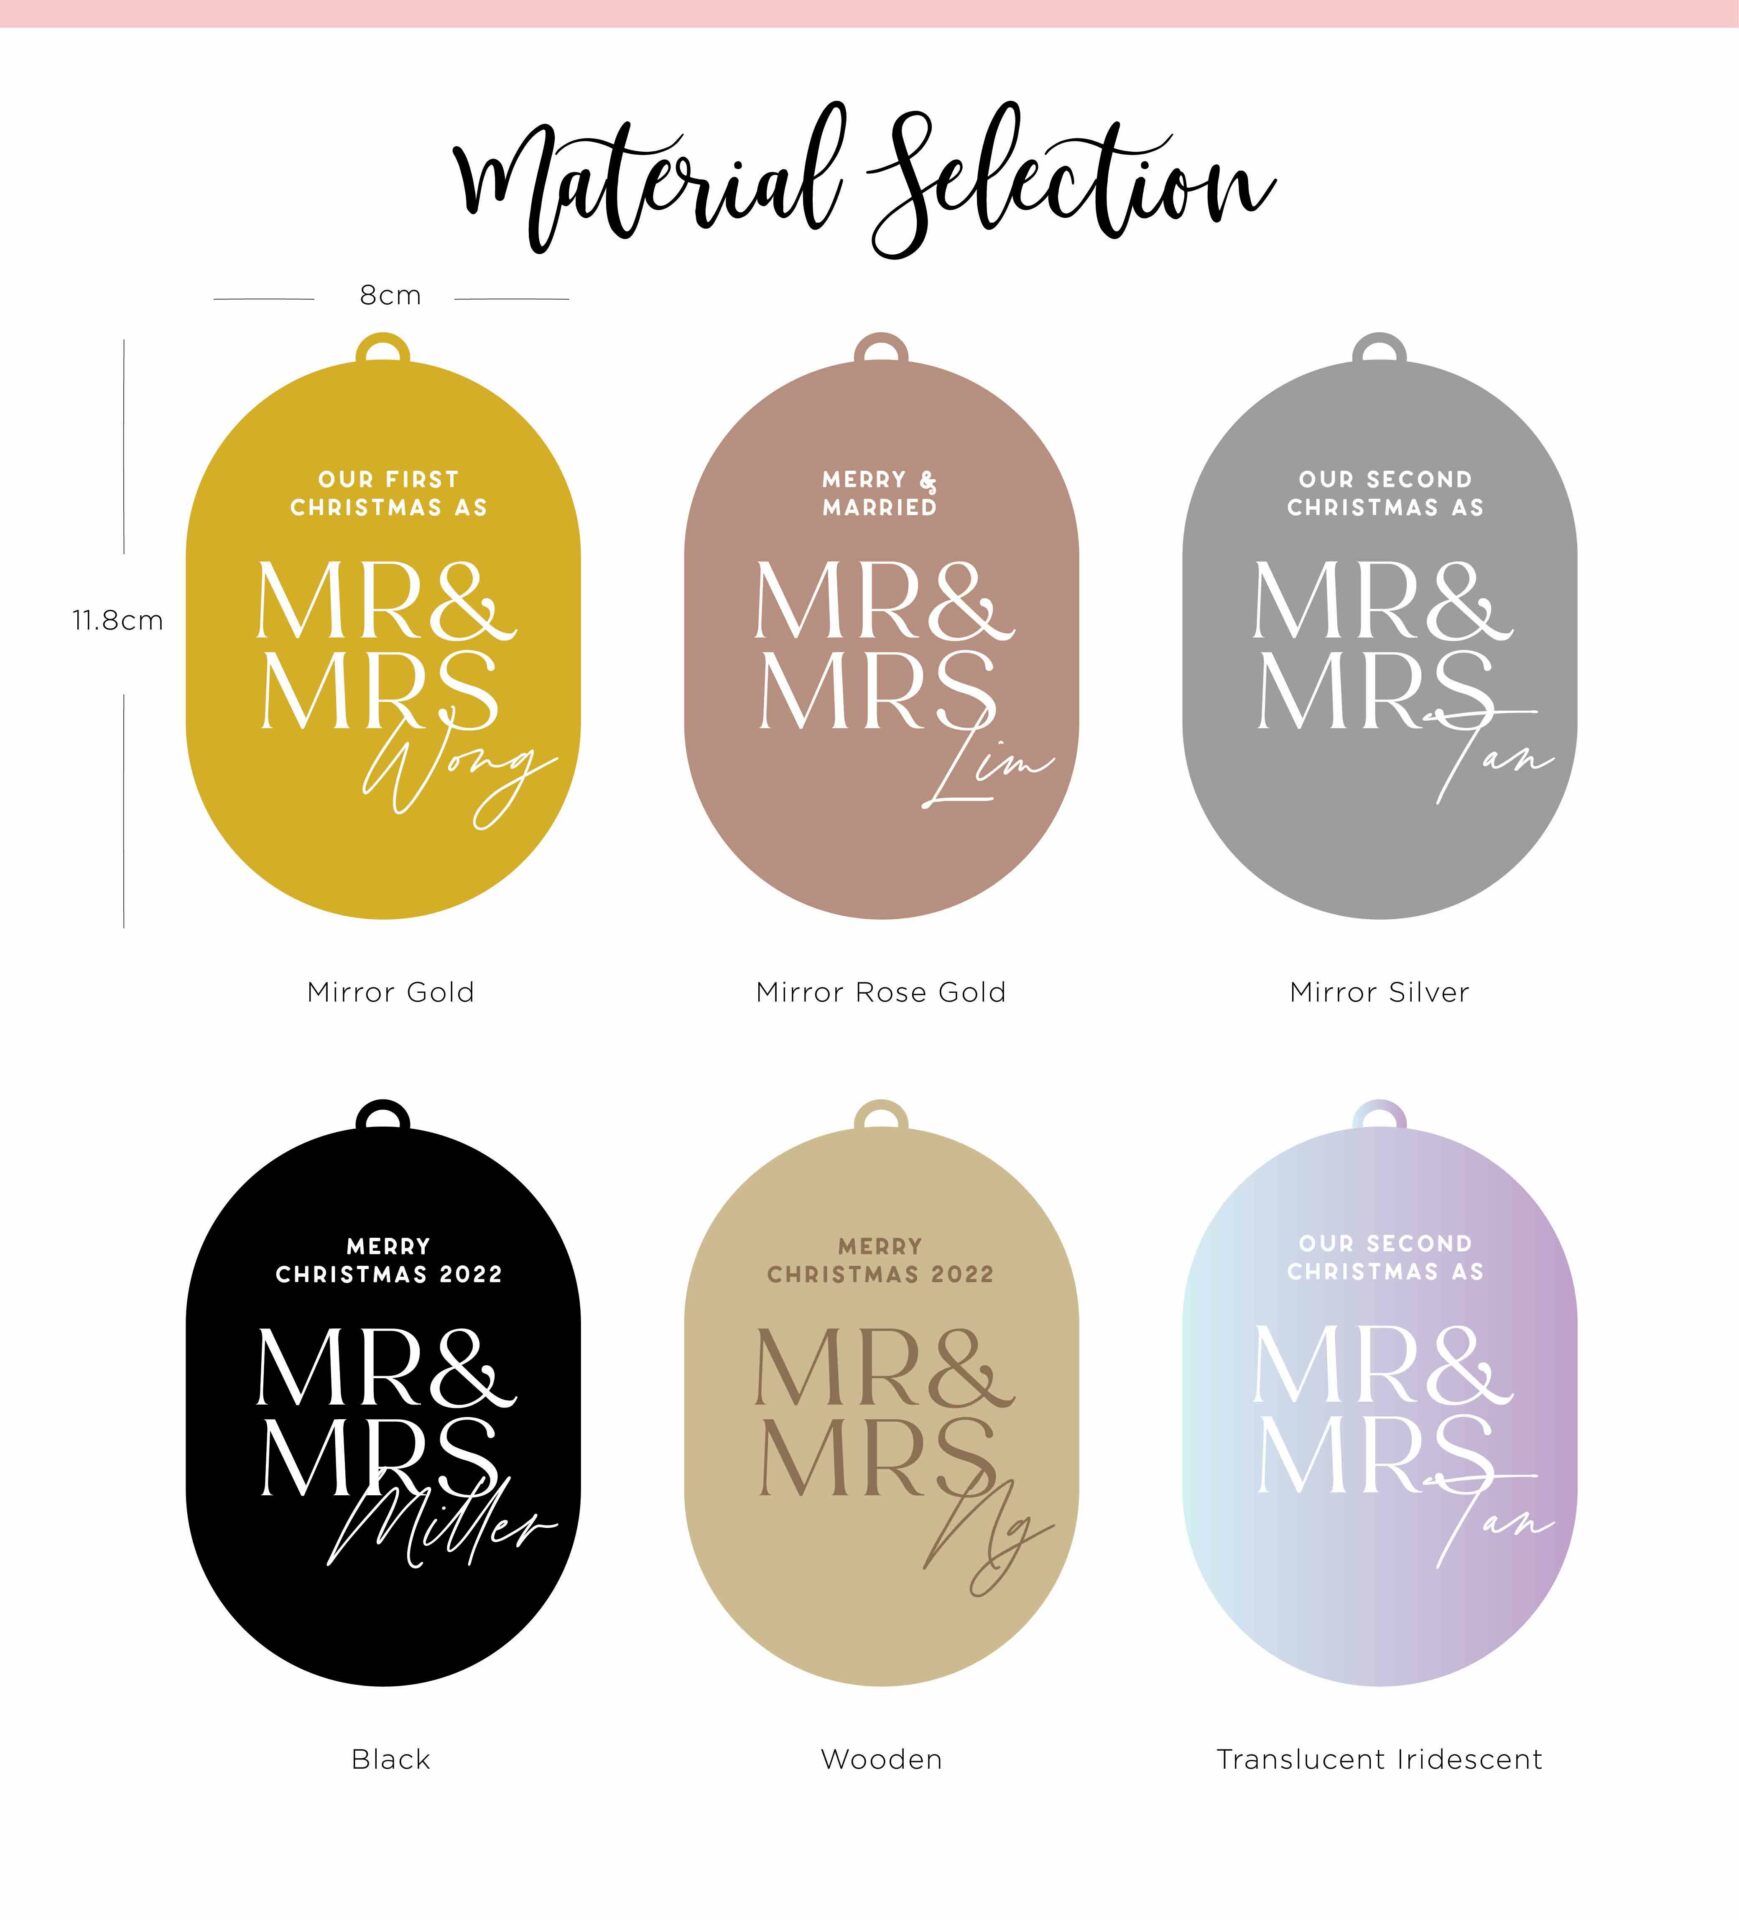 Mr & Mrs Design Oval Ornaments Material Selection